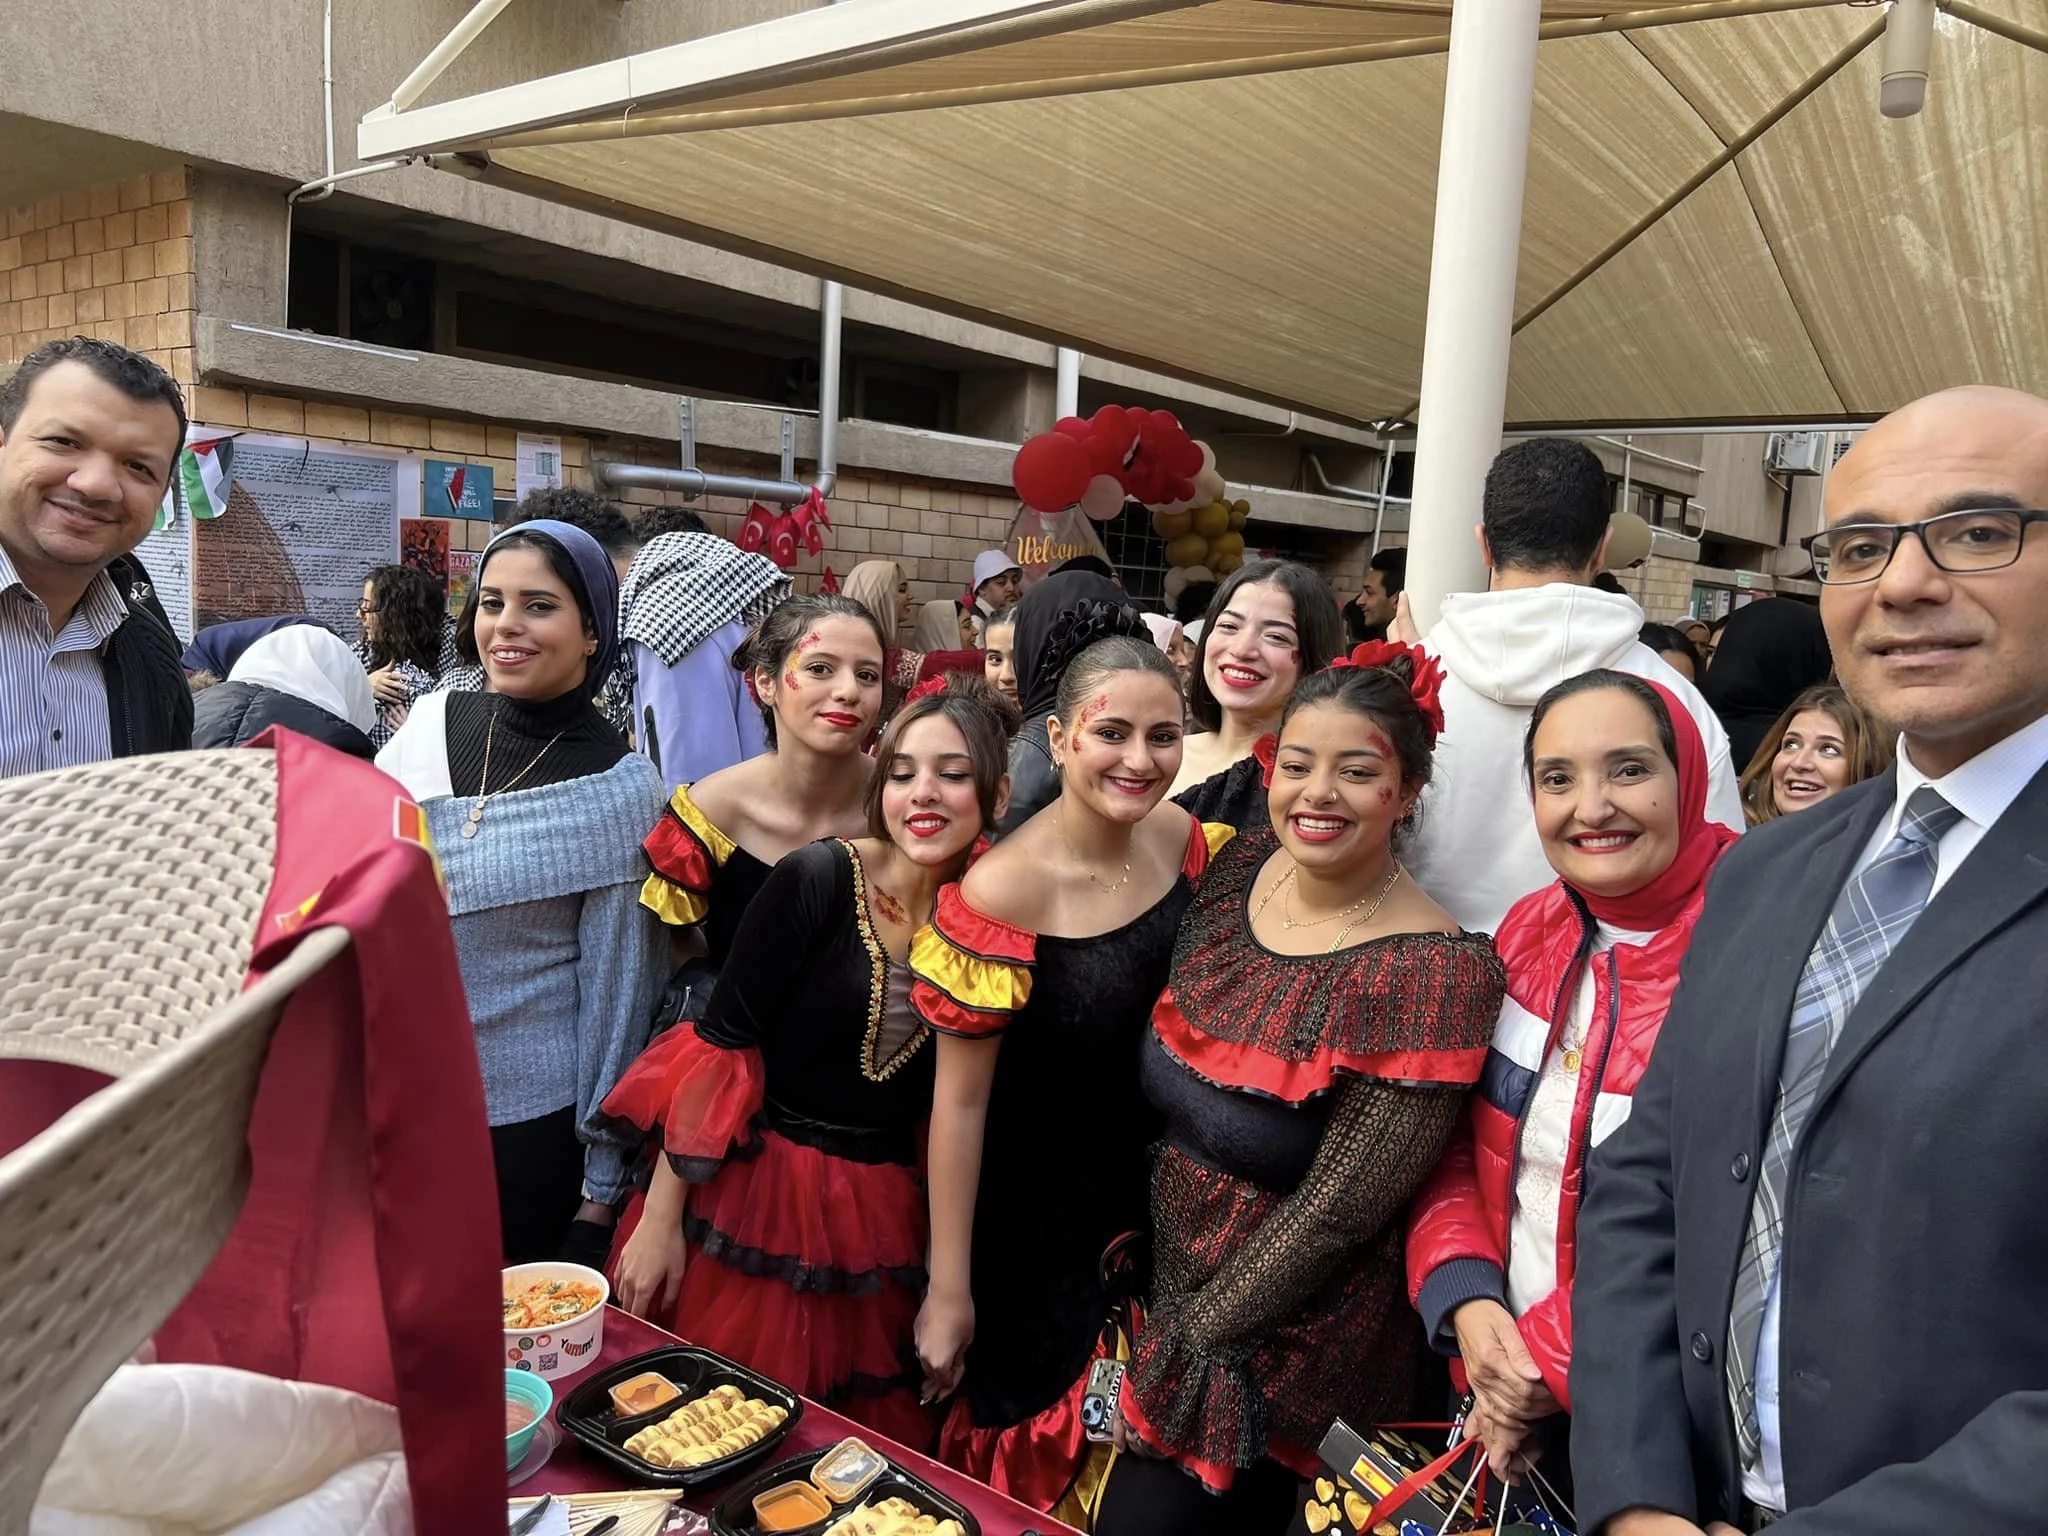 The Department of Cultural and Social Activities in Babi Qir organized an Intercultural Day for students of the College of Language and Media, including performances from various countries about the years of struggle of those peoples on: 12/25/20235